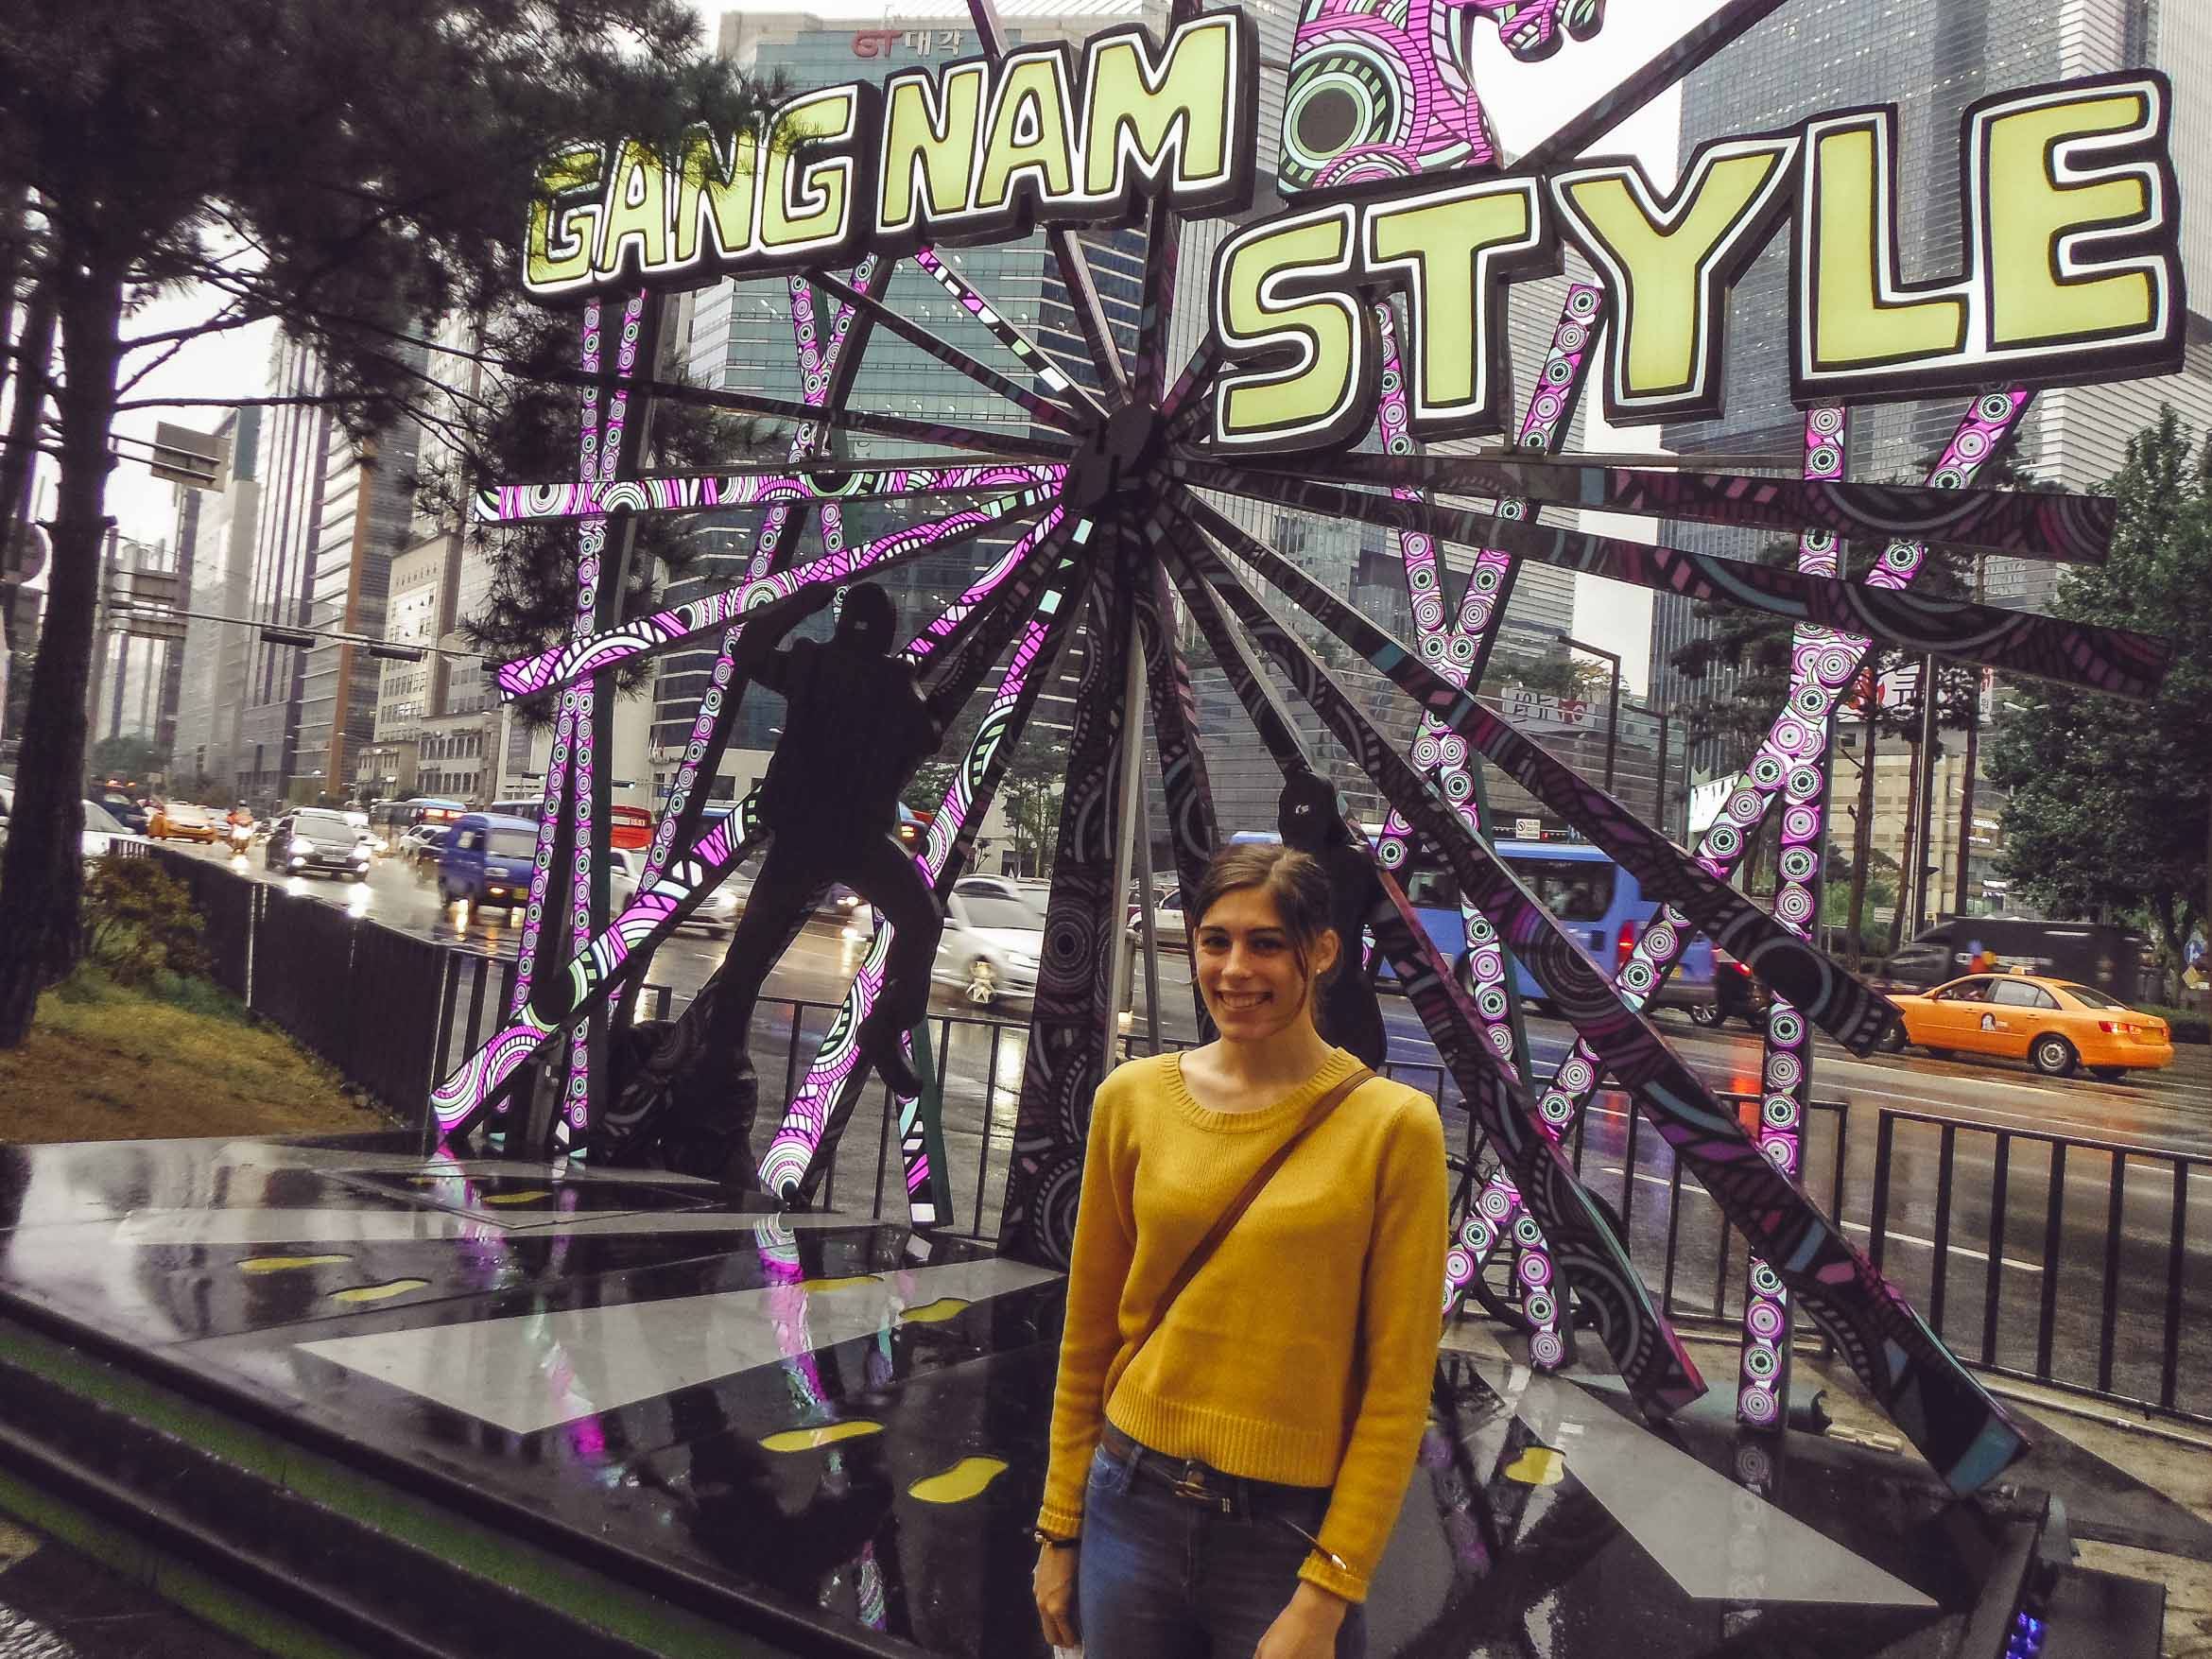 in front of Gangnam sign